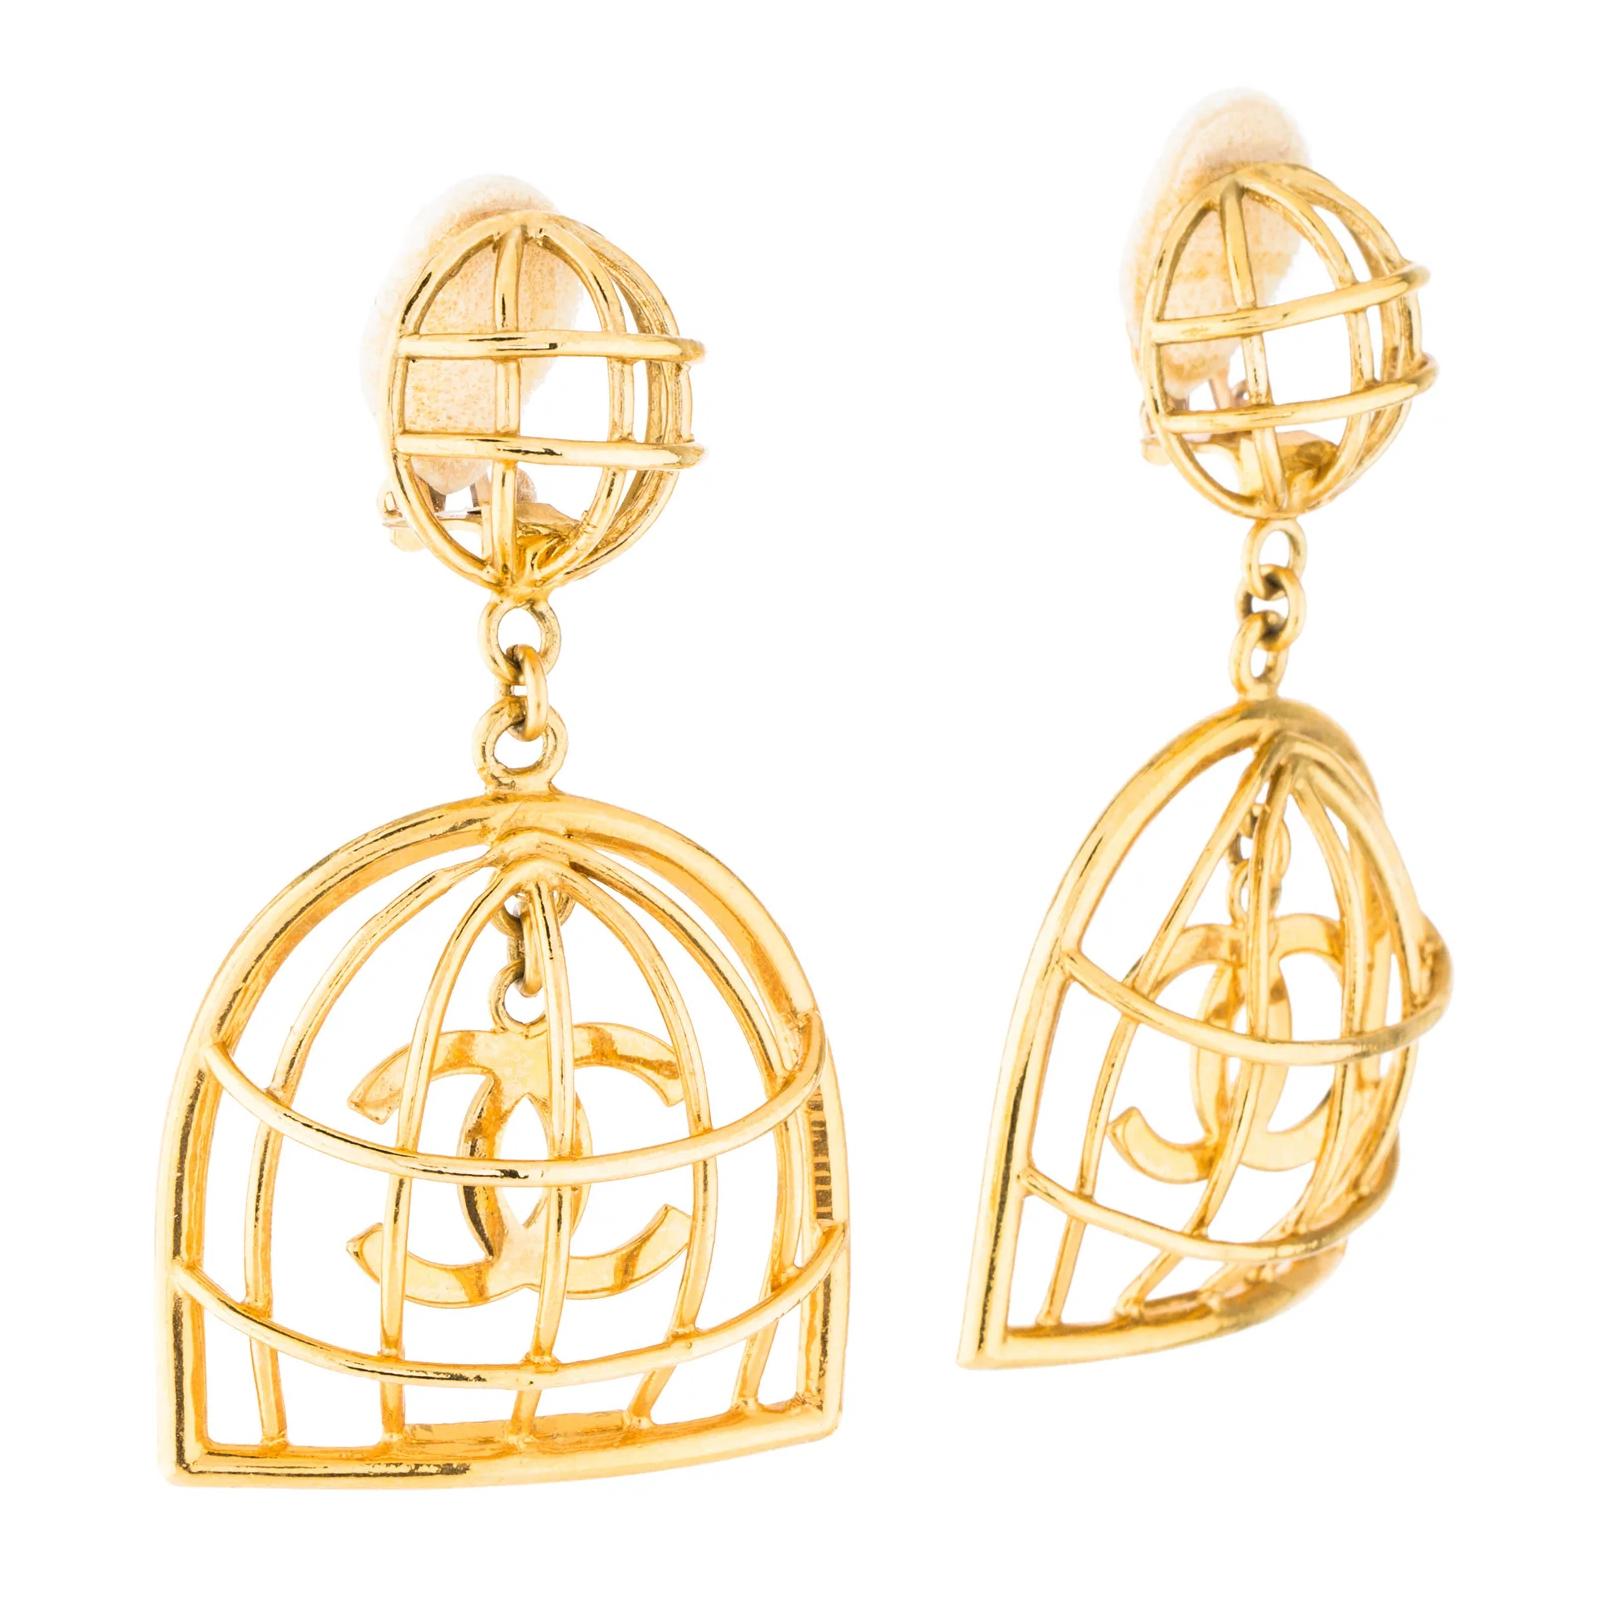 Gold-tone Chanel earrings featuring birdcage motif, CC logo, and clip-on closures. Collection 29.
Total Item Weight: 31.9g
Clasp Style: Clip-On

COLOR/MATERIAL: Gold tone metal
MEASURES: Drop 2.80” & Width 1.50”
COMES WITH: Box
CONDITION: Good -